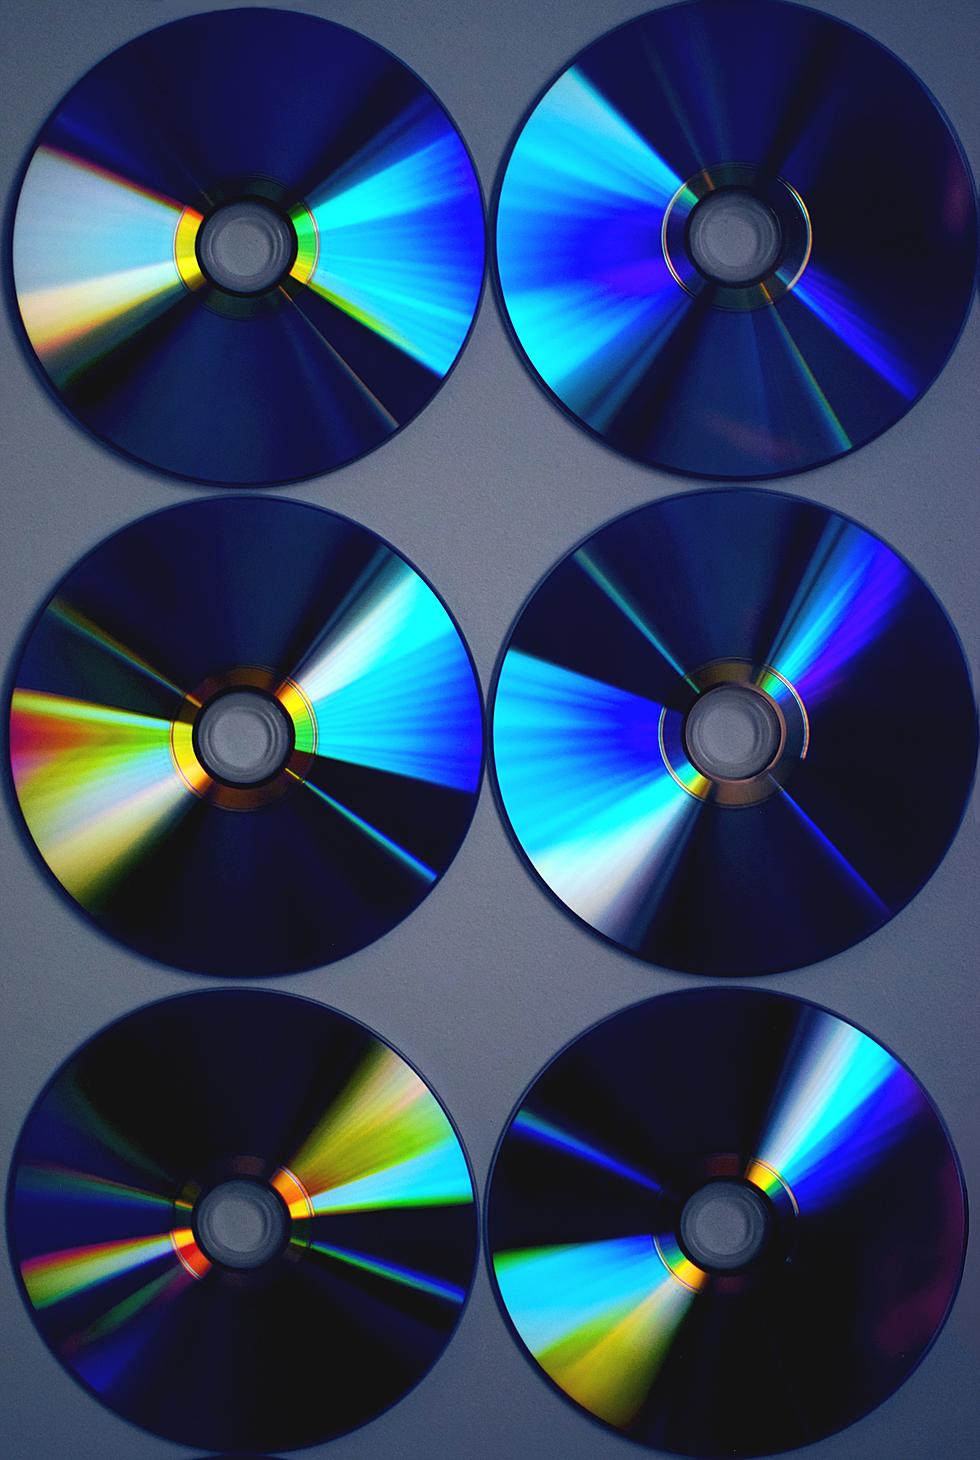 H.V. Musicians: Please Don’t Send Me Your CDs, and Here’s Why